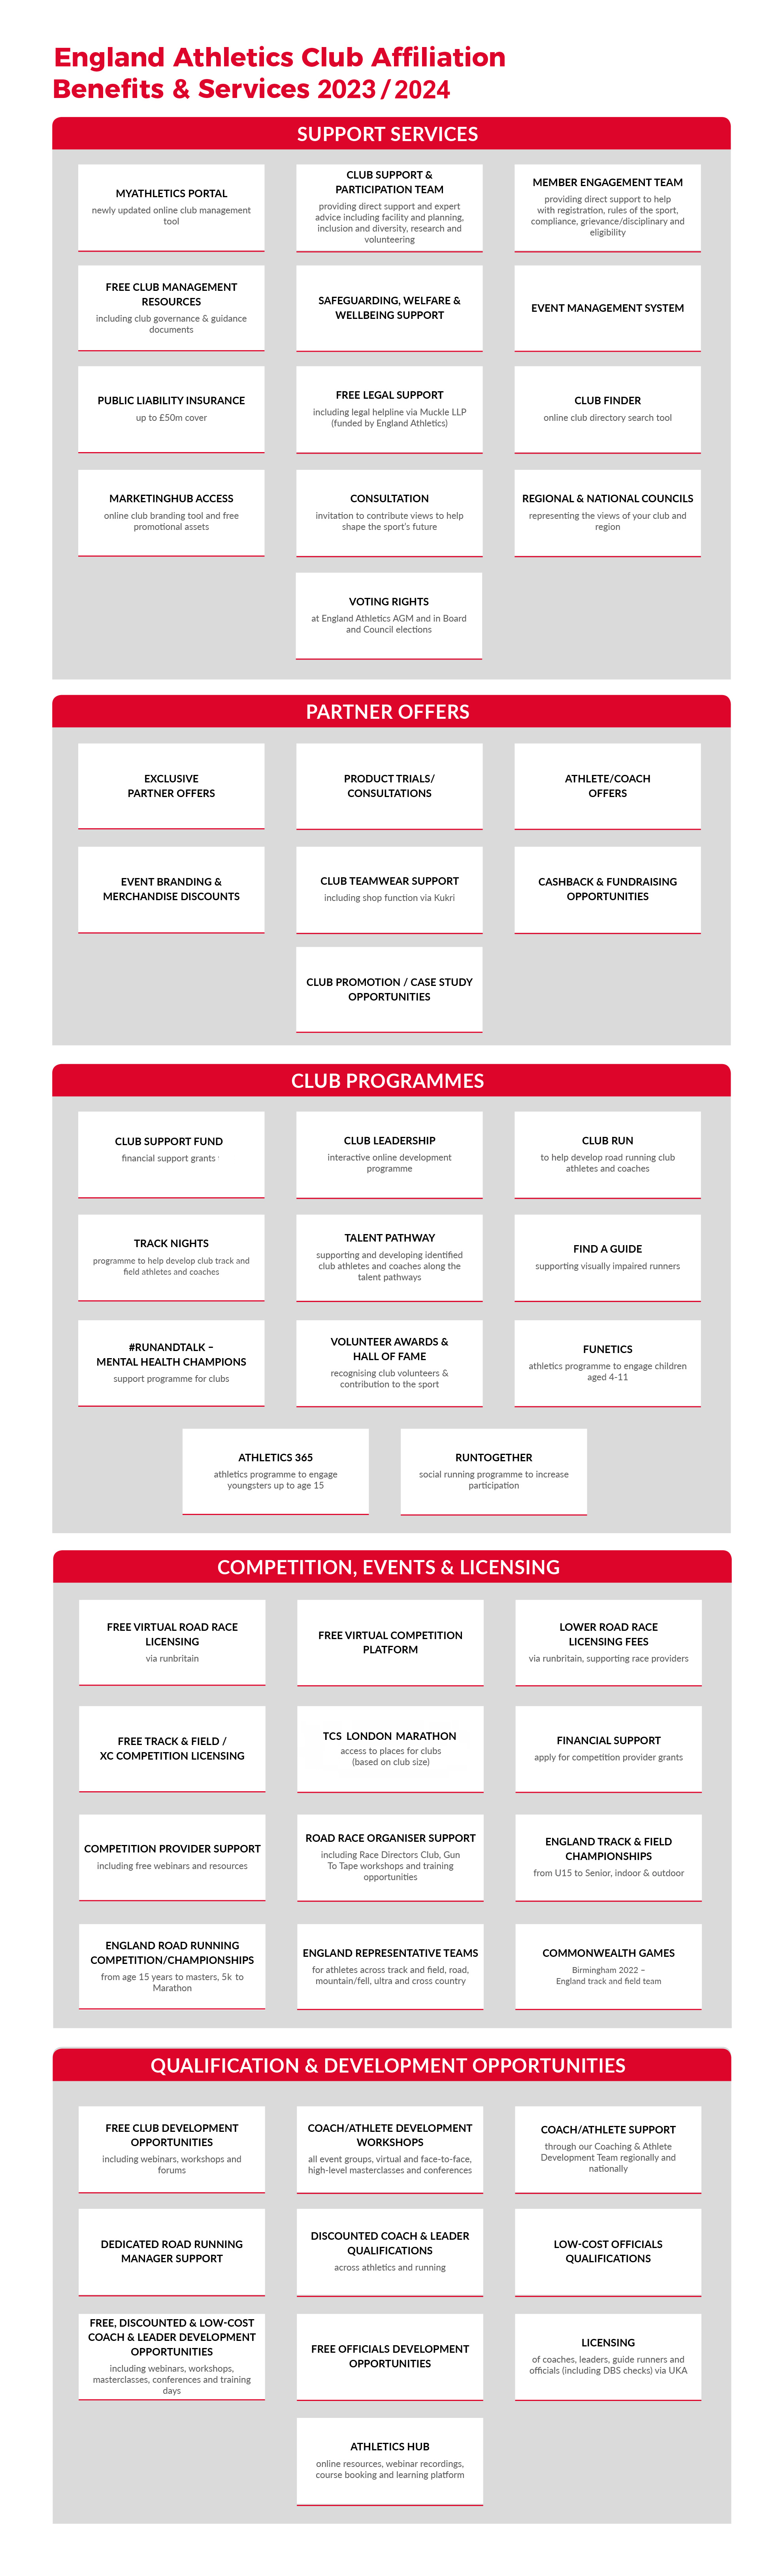 Benefits of Club Affiliation - Clubs & Facilities